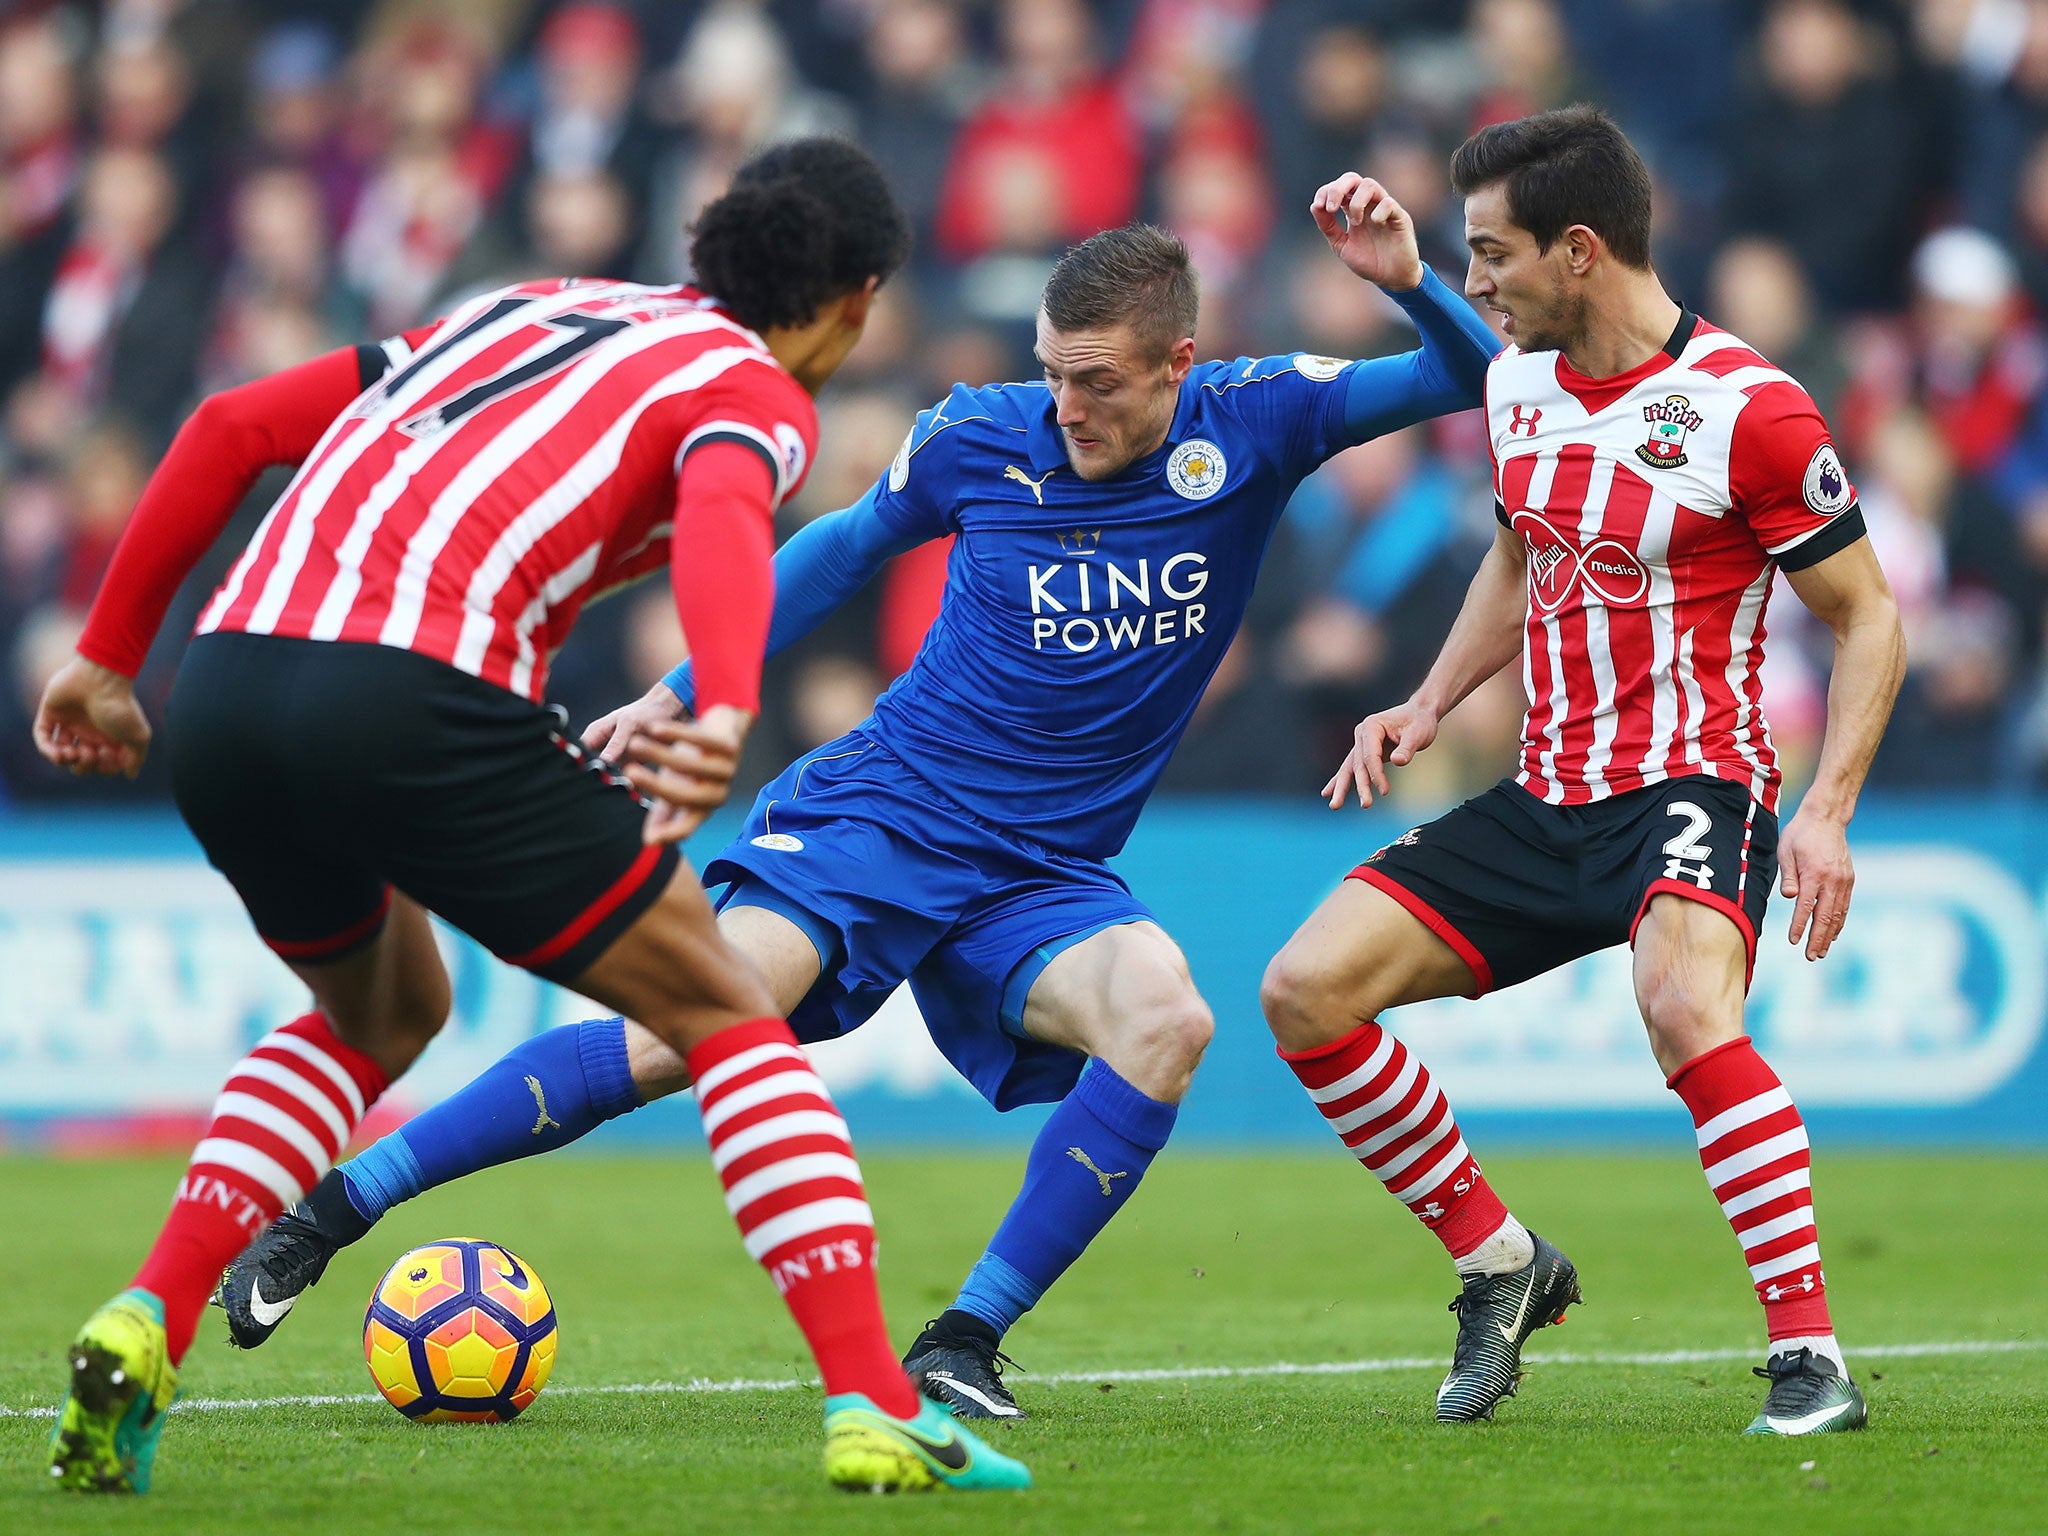 Southampton won 3-0 in their last encounter with Leicester